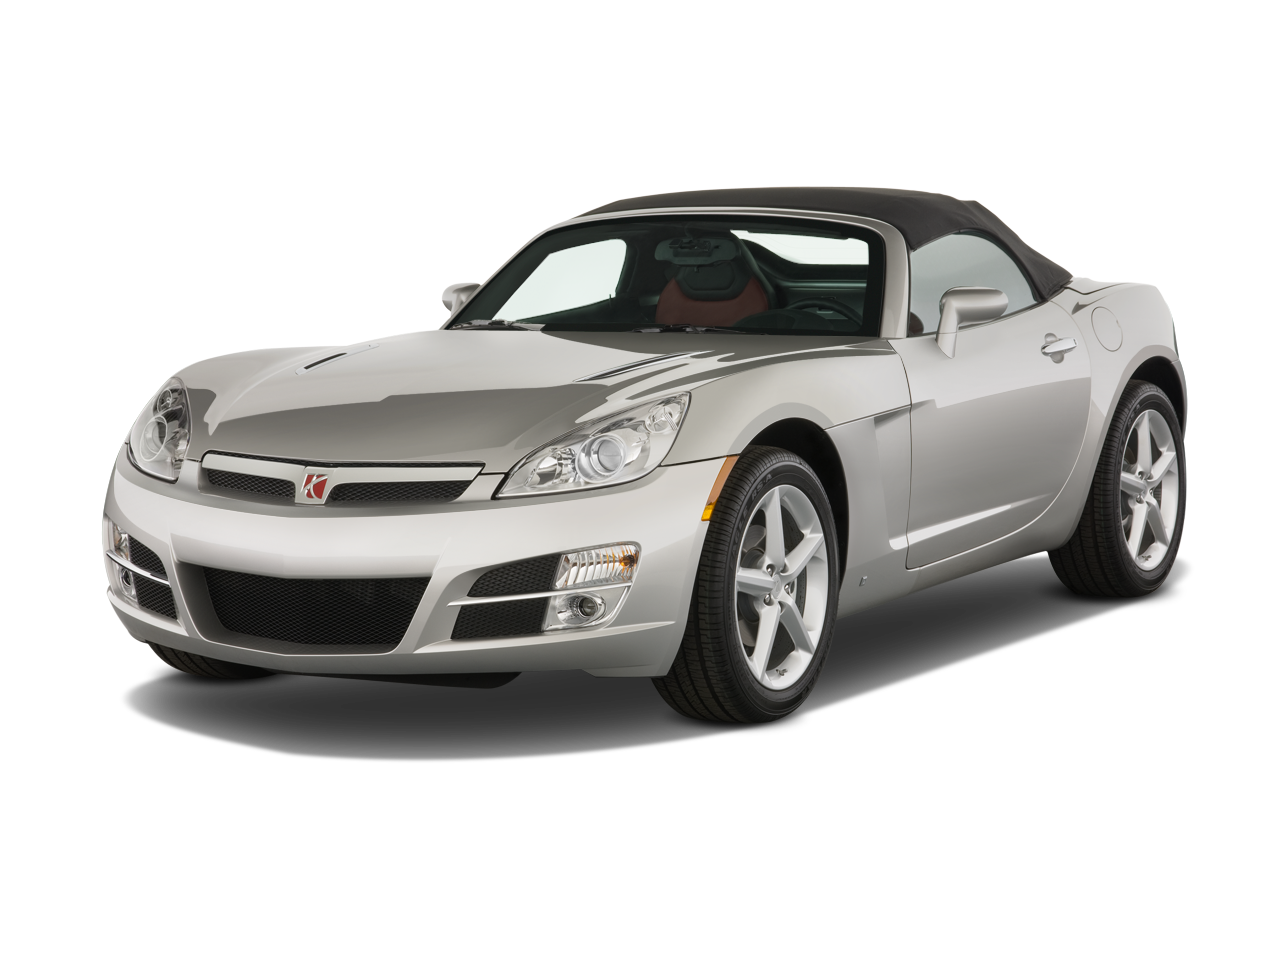 2009 Saturn Sky Prices, Reviews, and Photos - MotorTrend